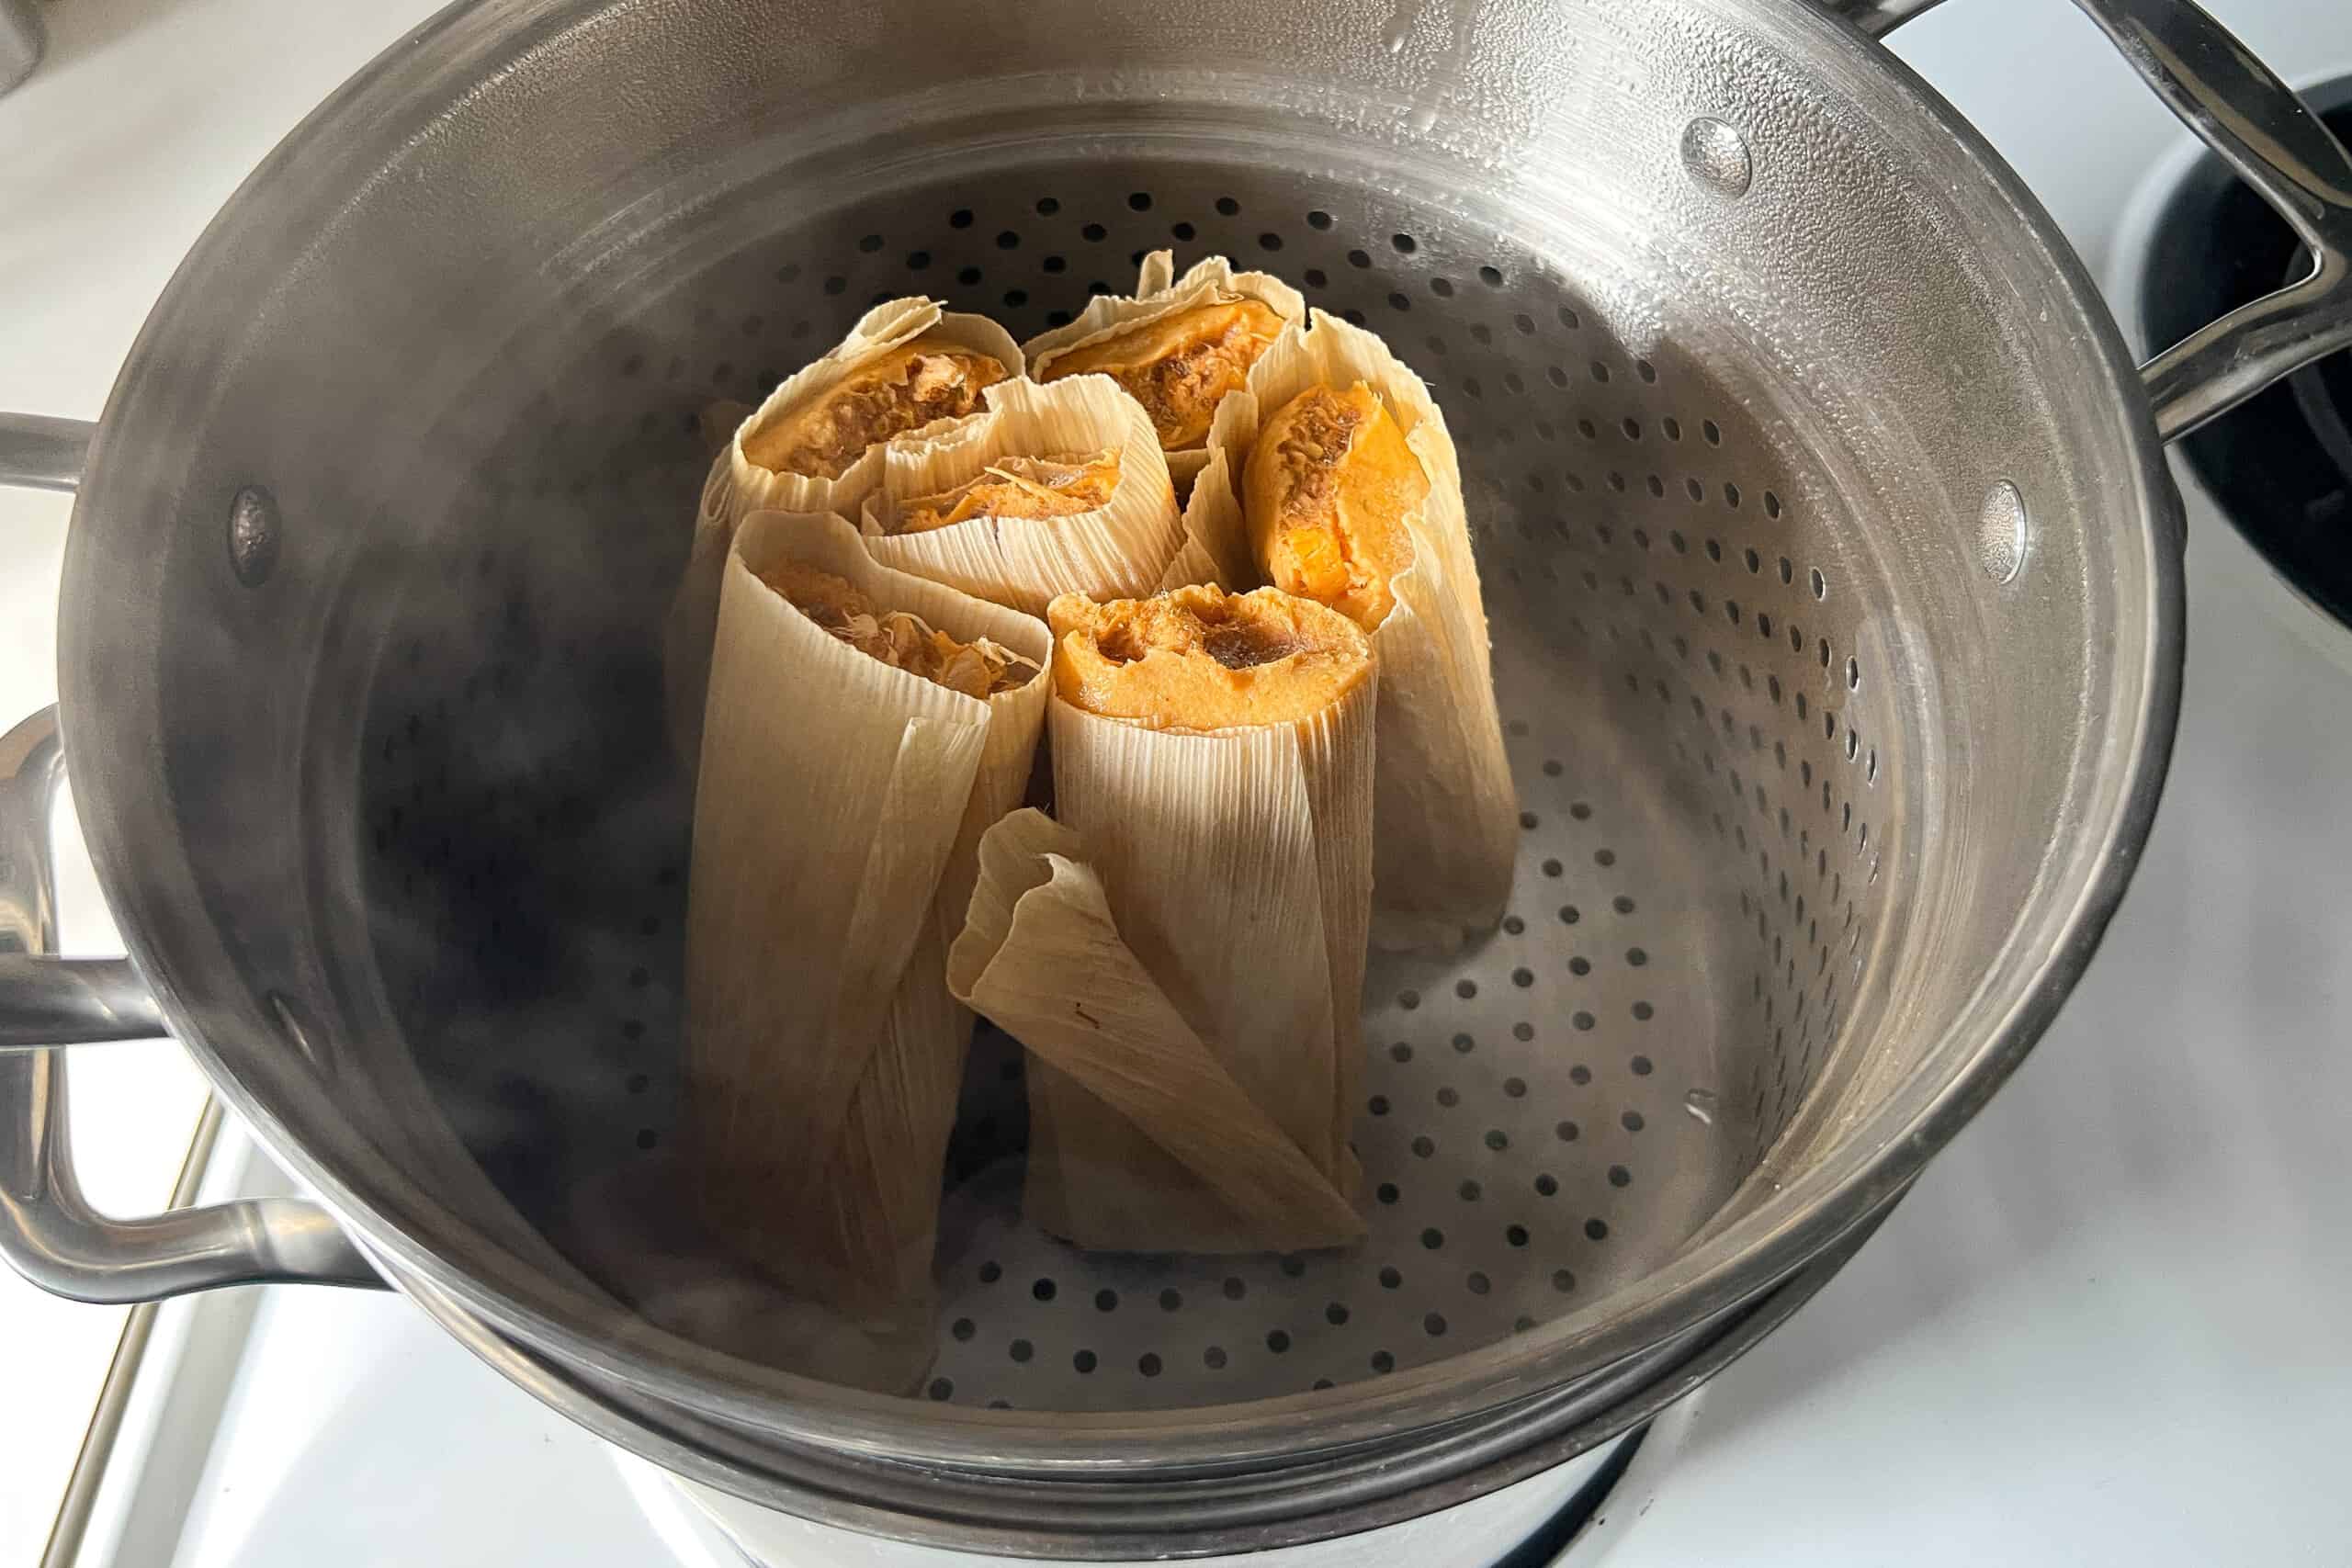 tamales placed upright in the steamer basket of a stockpot